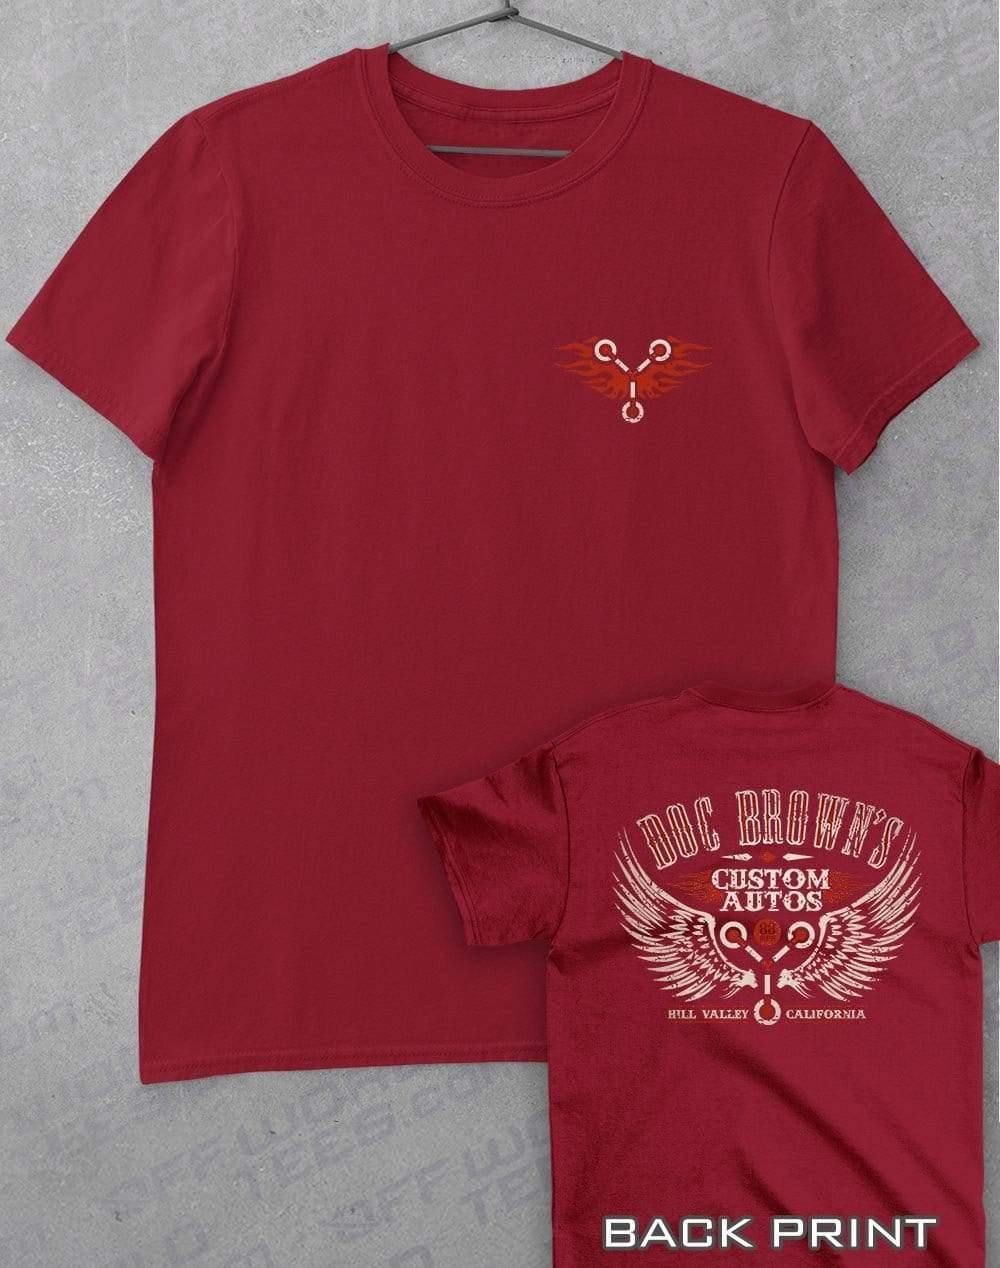 Doc Brown's Custom Autos with Back Print T-Shirt S / Cardinal Red  - Off World Tees